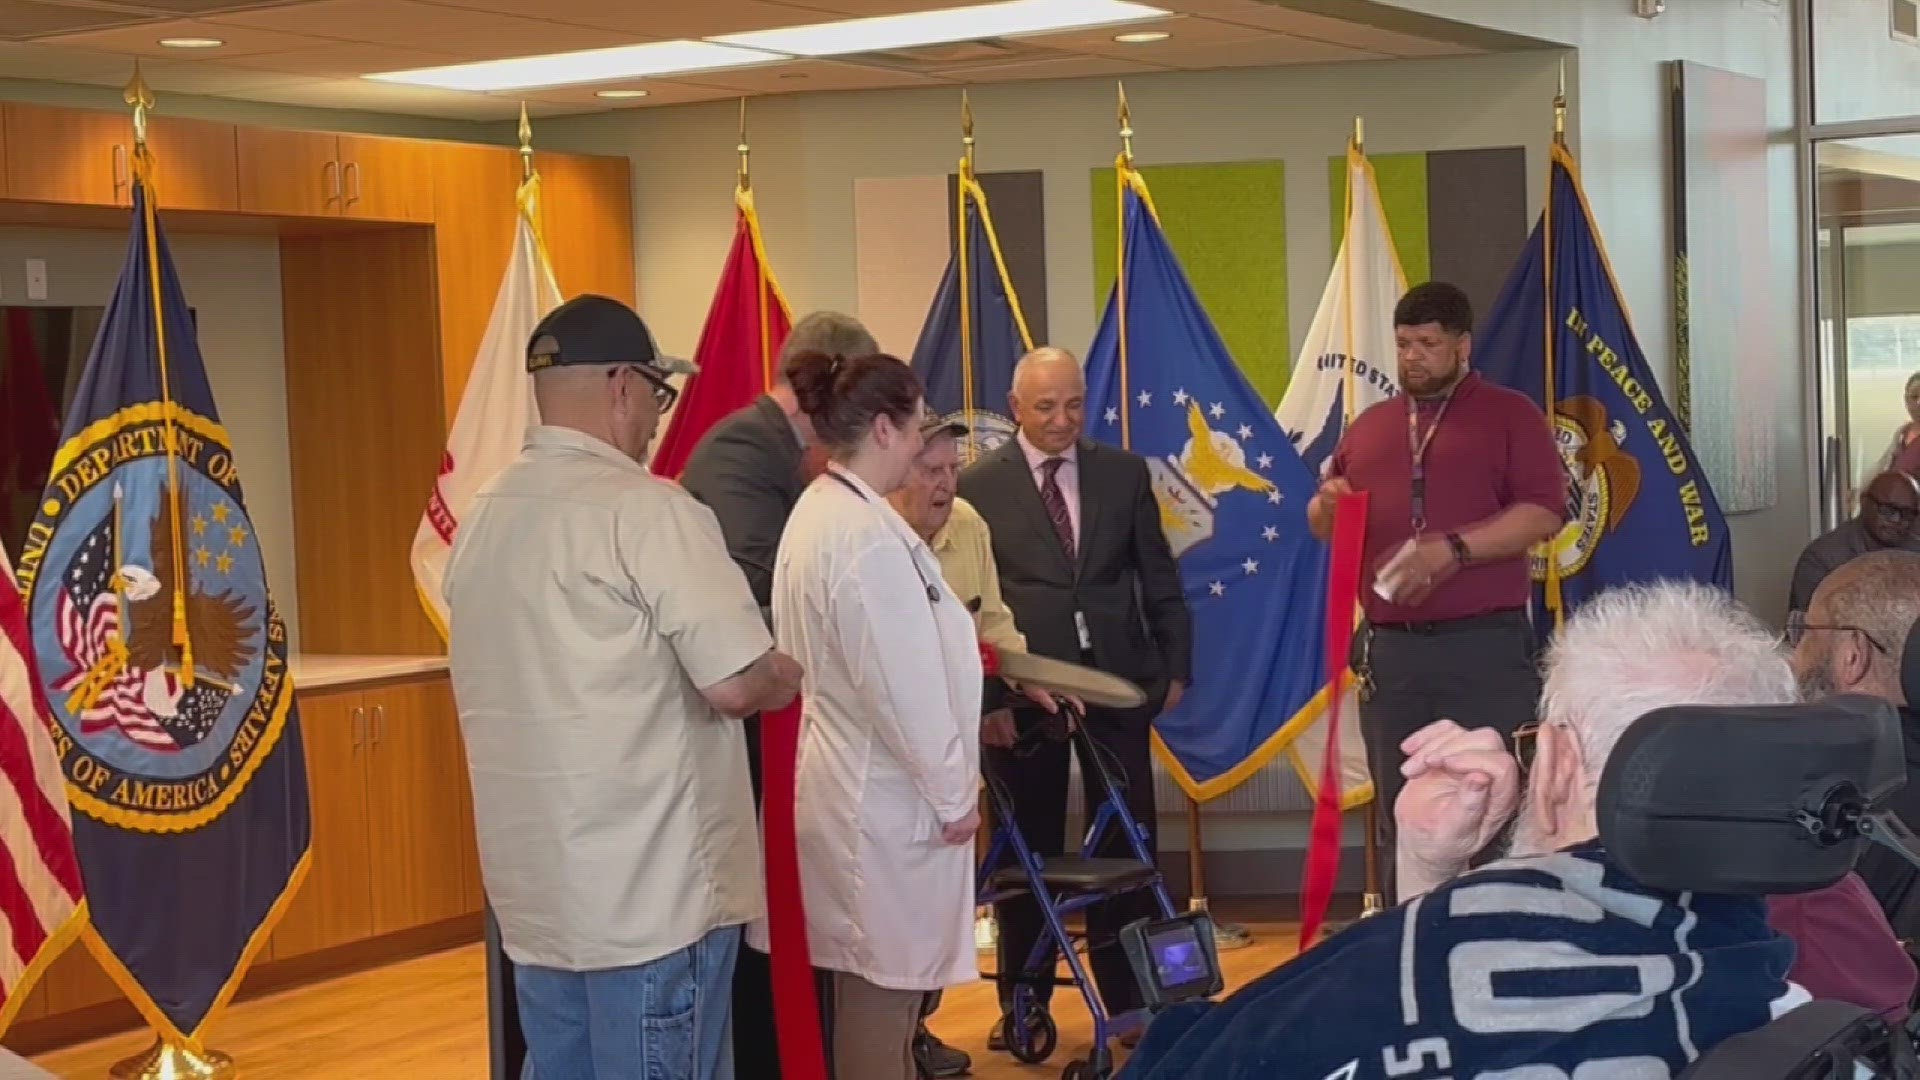 The West Texas VA Healthcare Center has opened its brand new facility in Big Spring Thursday to take care of local veterans.